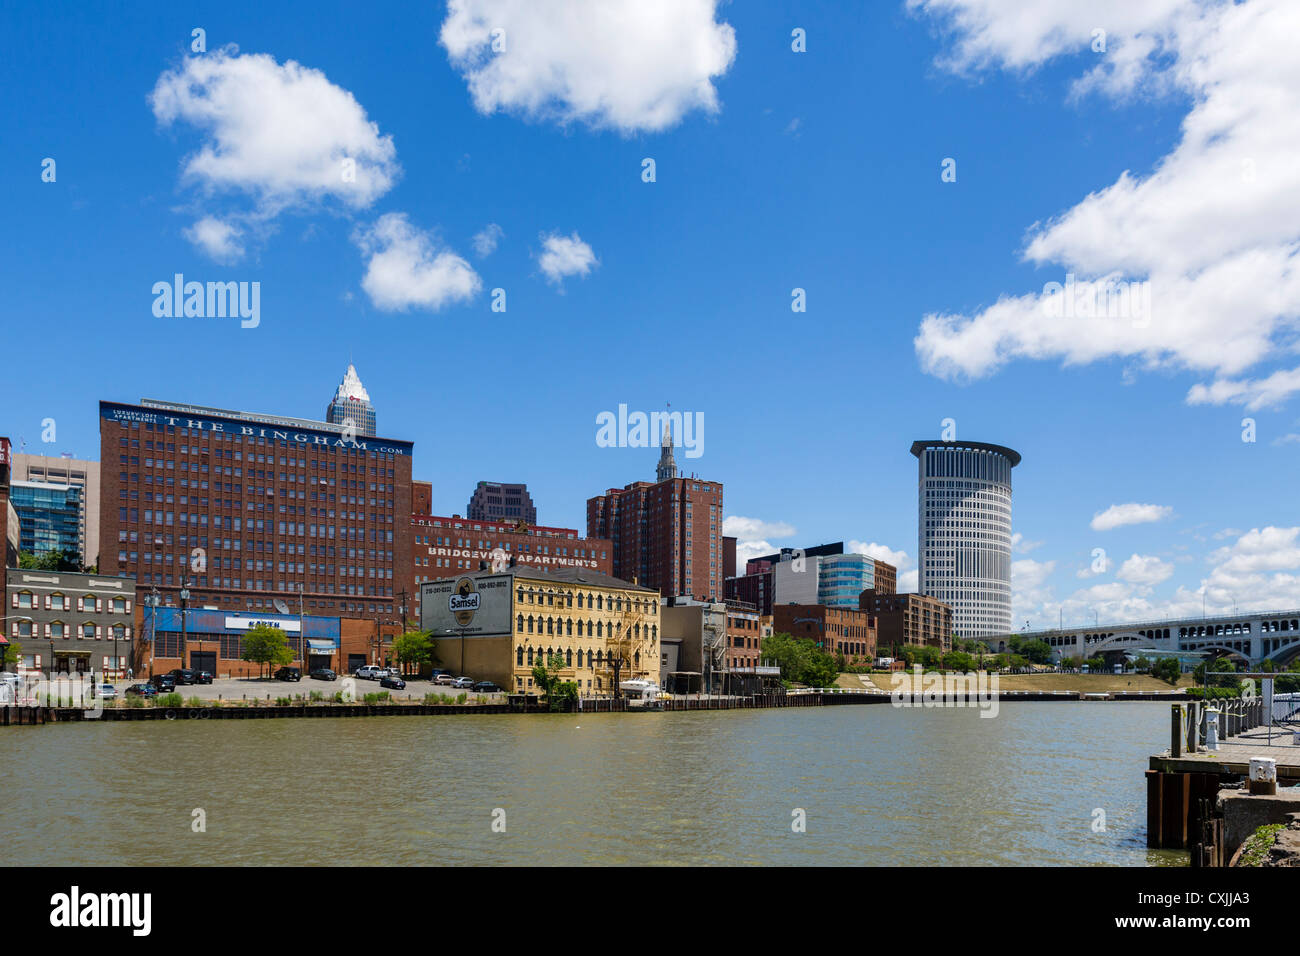 Waterfront view of the Cuyahoga River in the Flats district, Cleveland, Ohio, USA Stock Photo